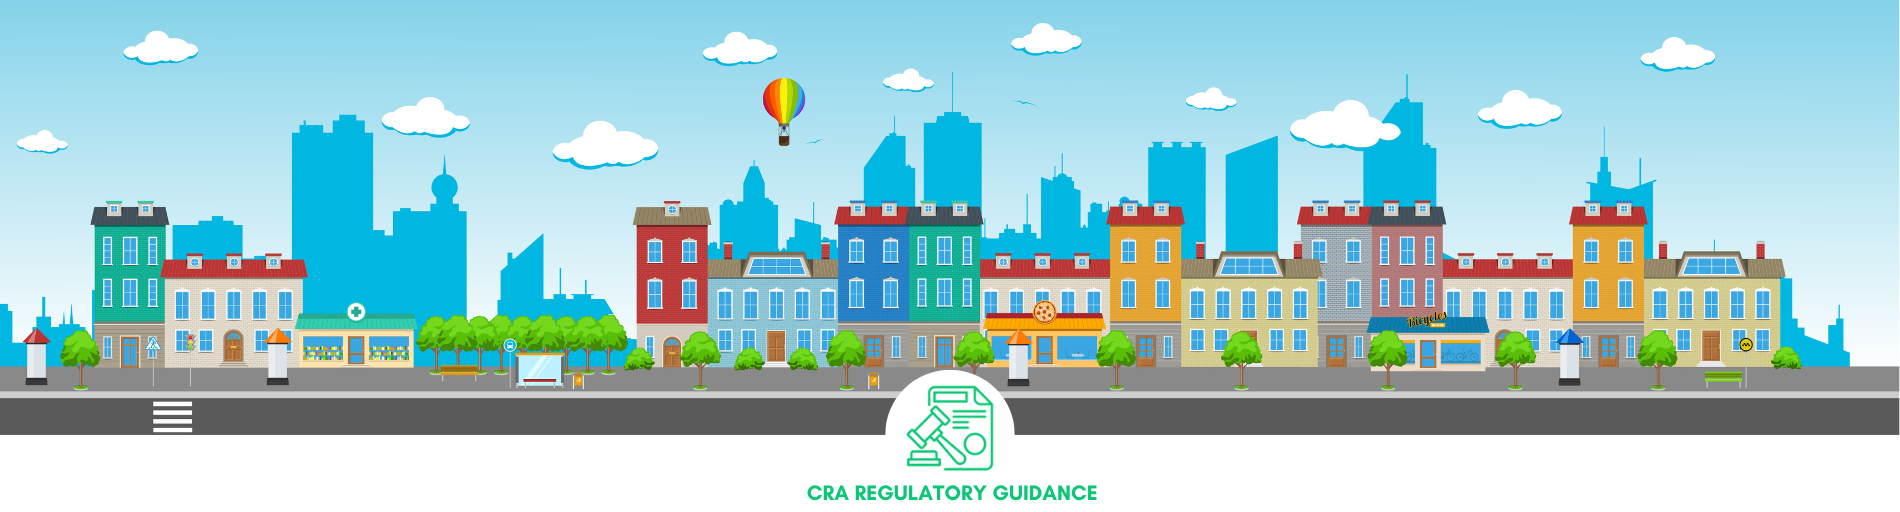 Strategic Focus: How to Use the CRA Q&As to Support Modern Needs in Communities